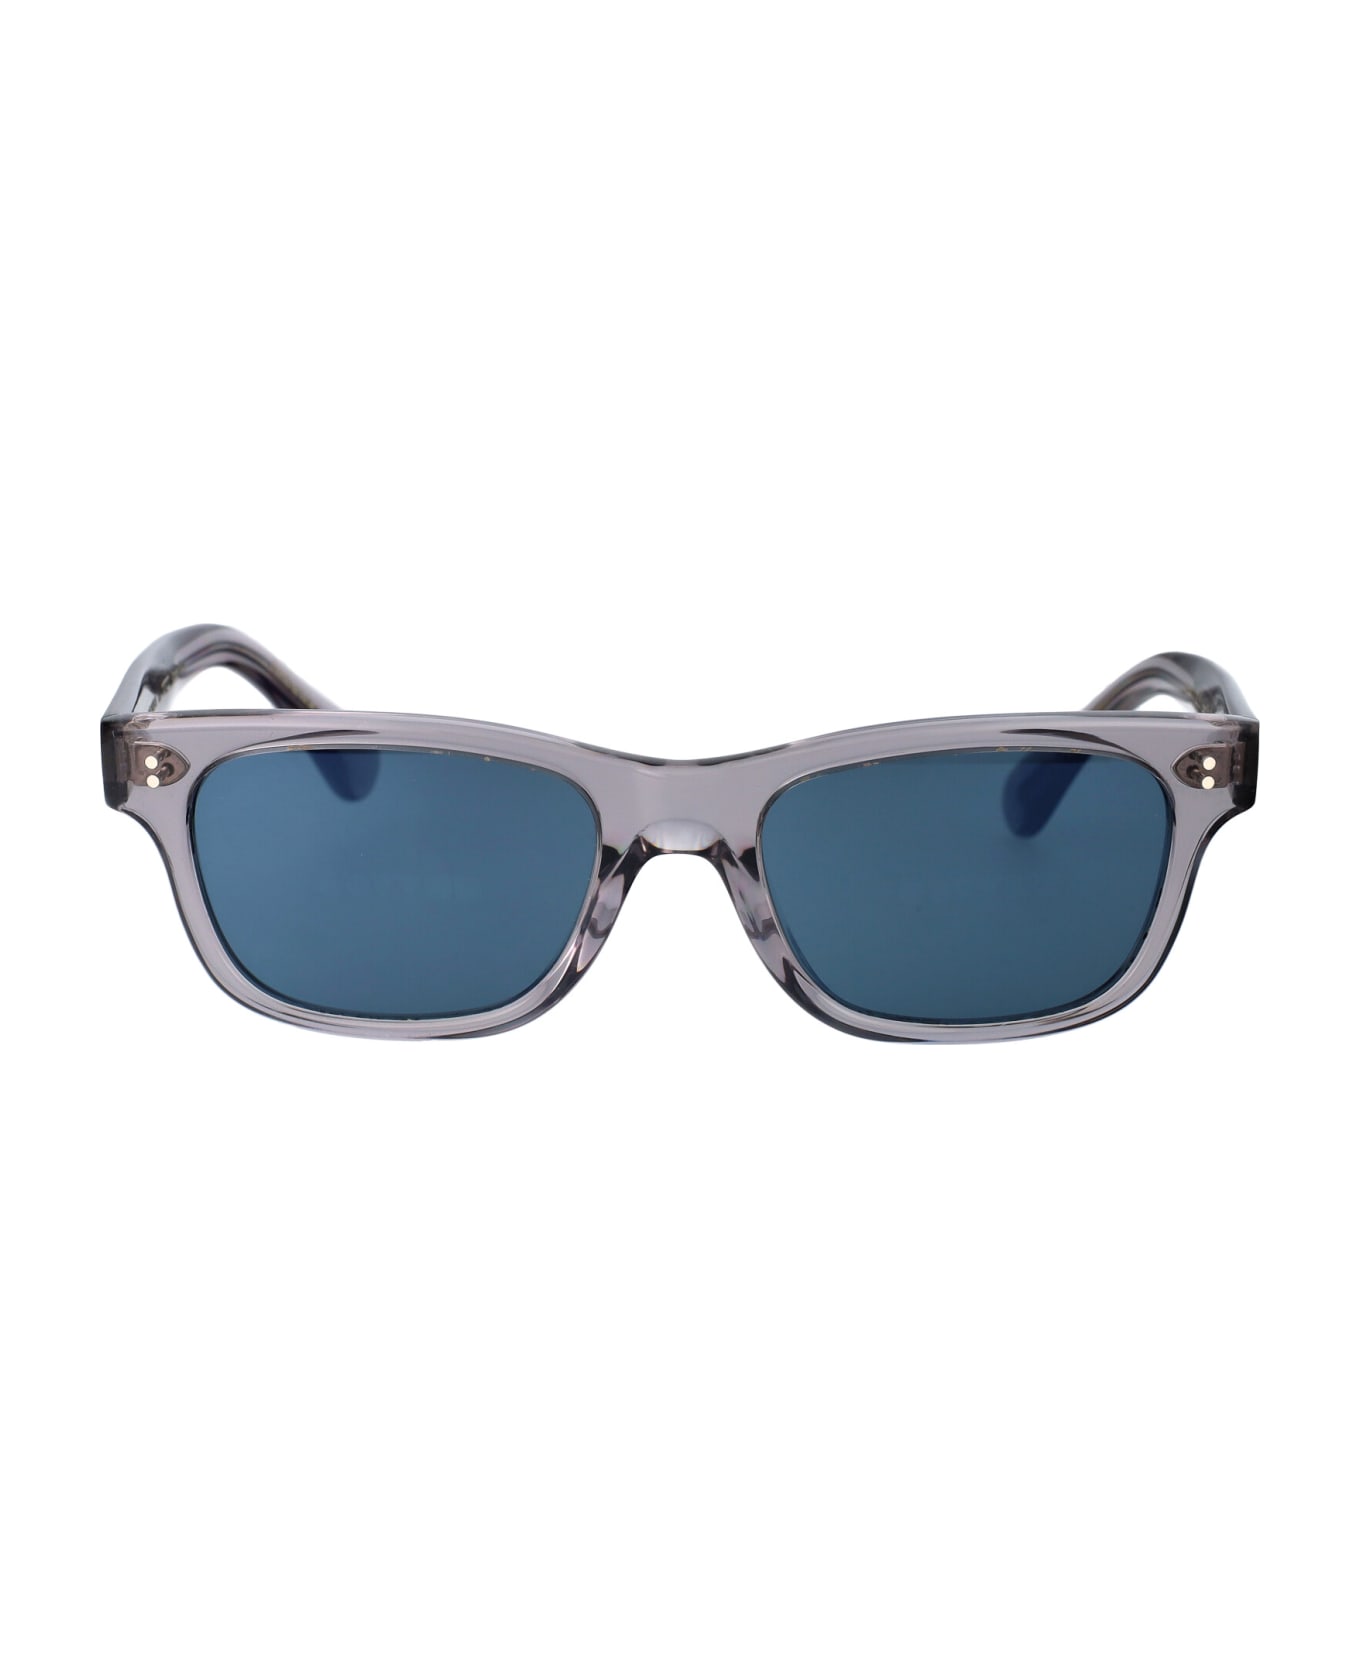 Oliver Peoples Rosson Sun Sunglasses - 1132W5 Workman Grey